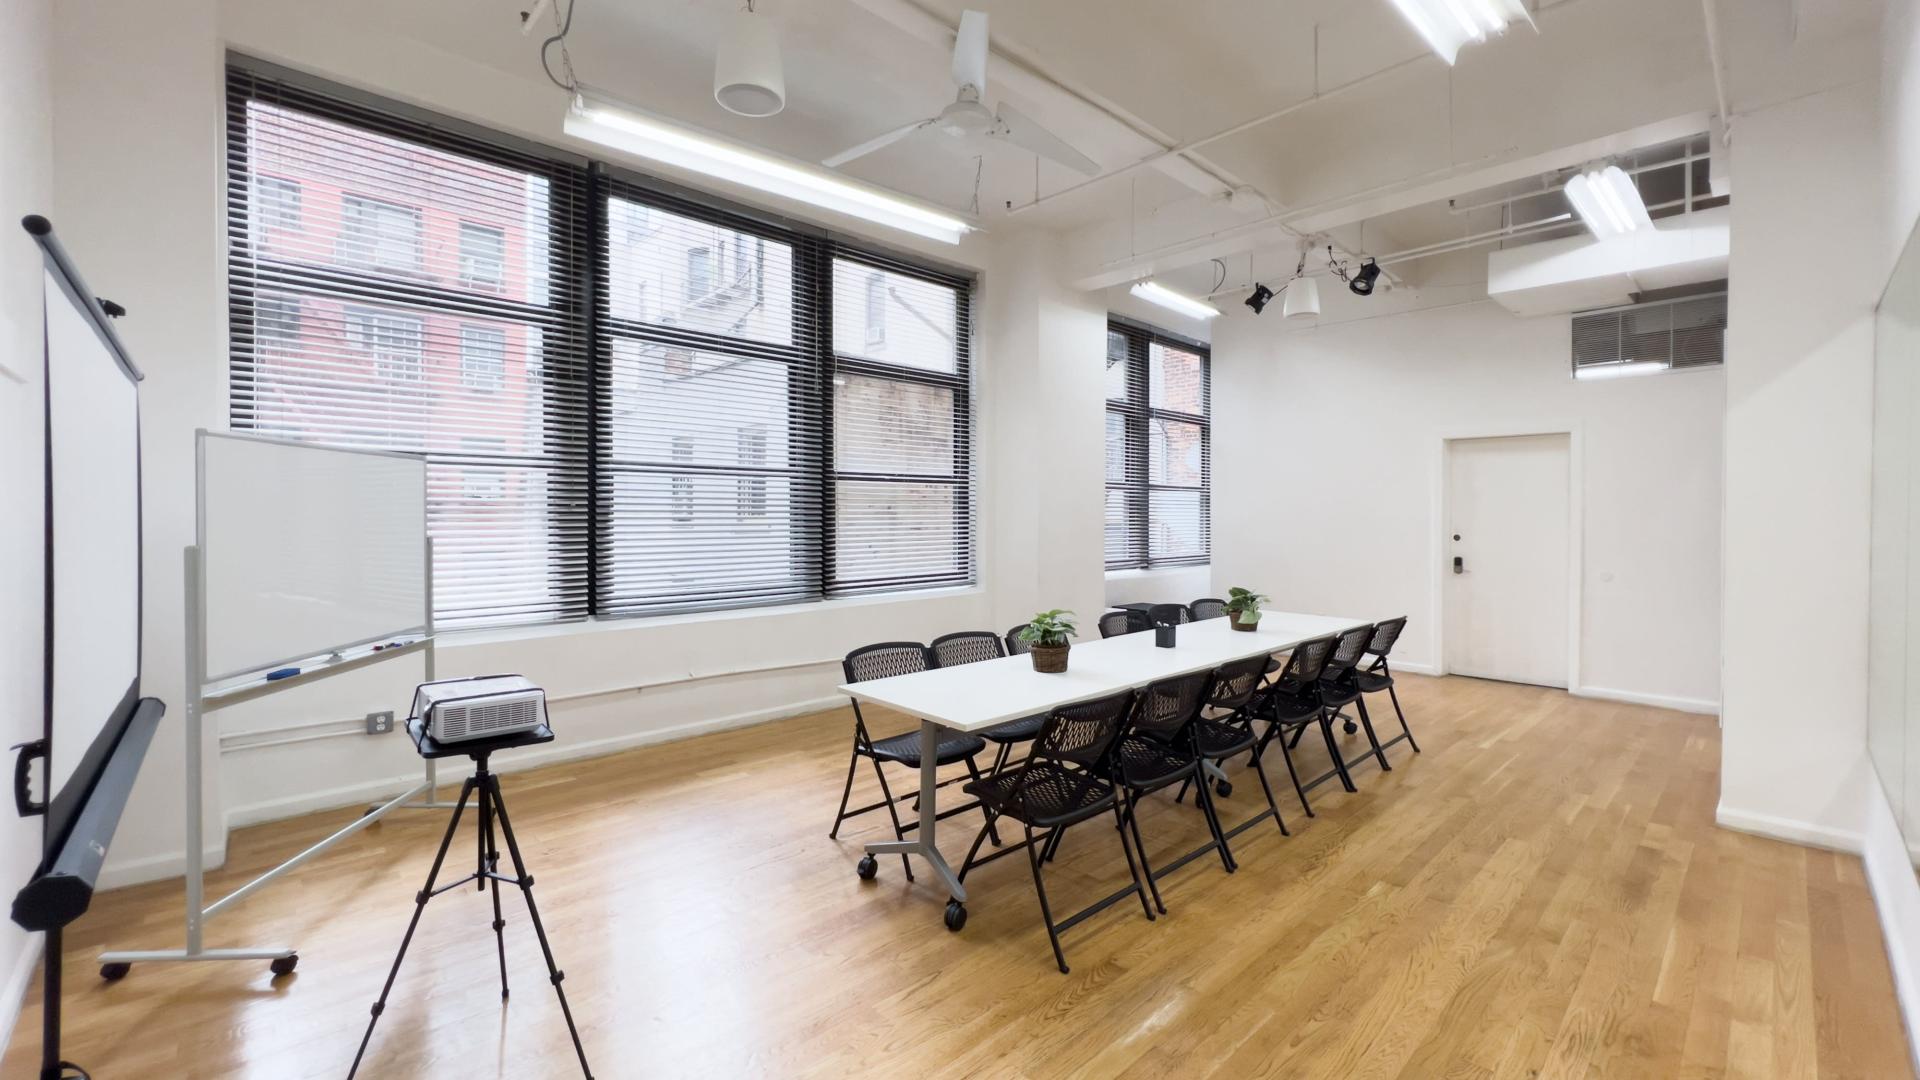 Conference Venues for Rent in Manhattan, NY